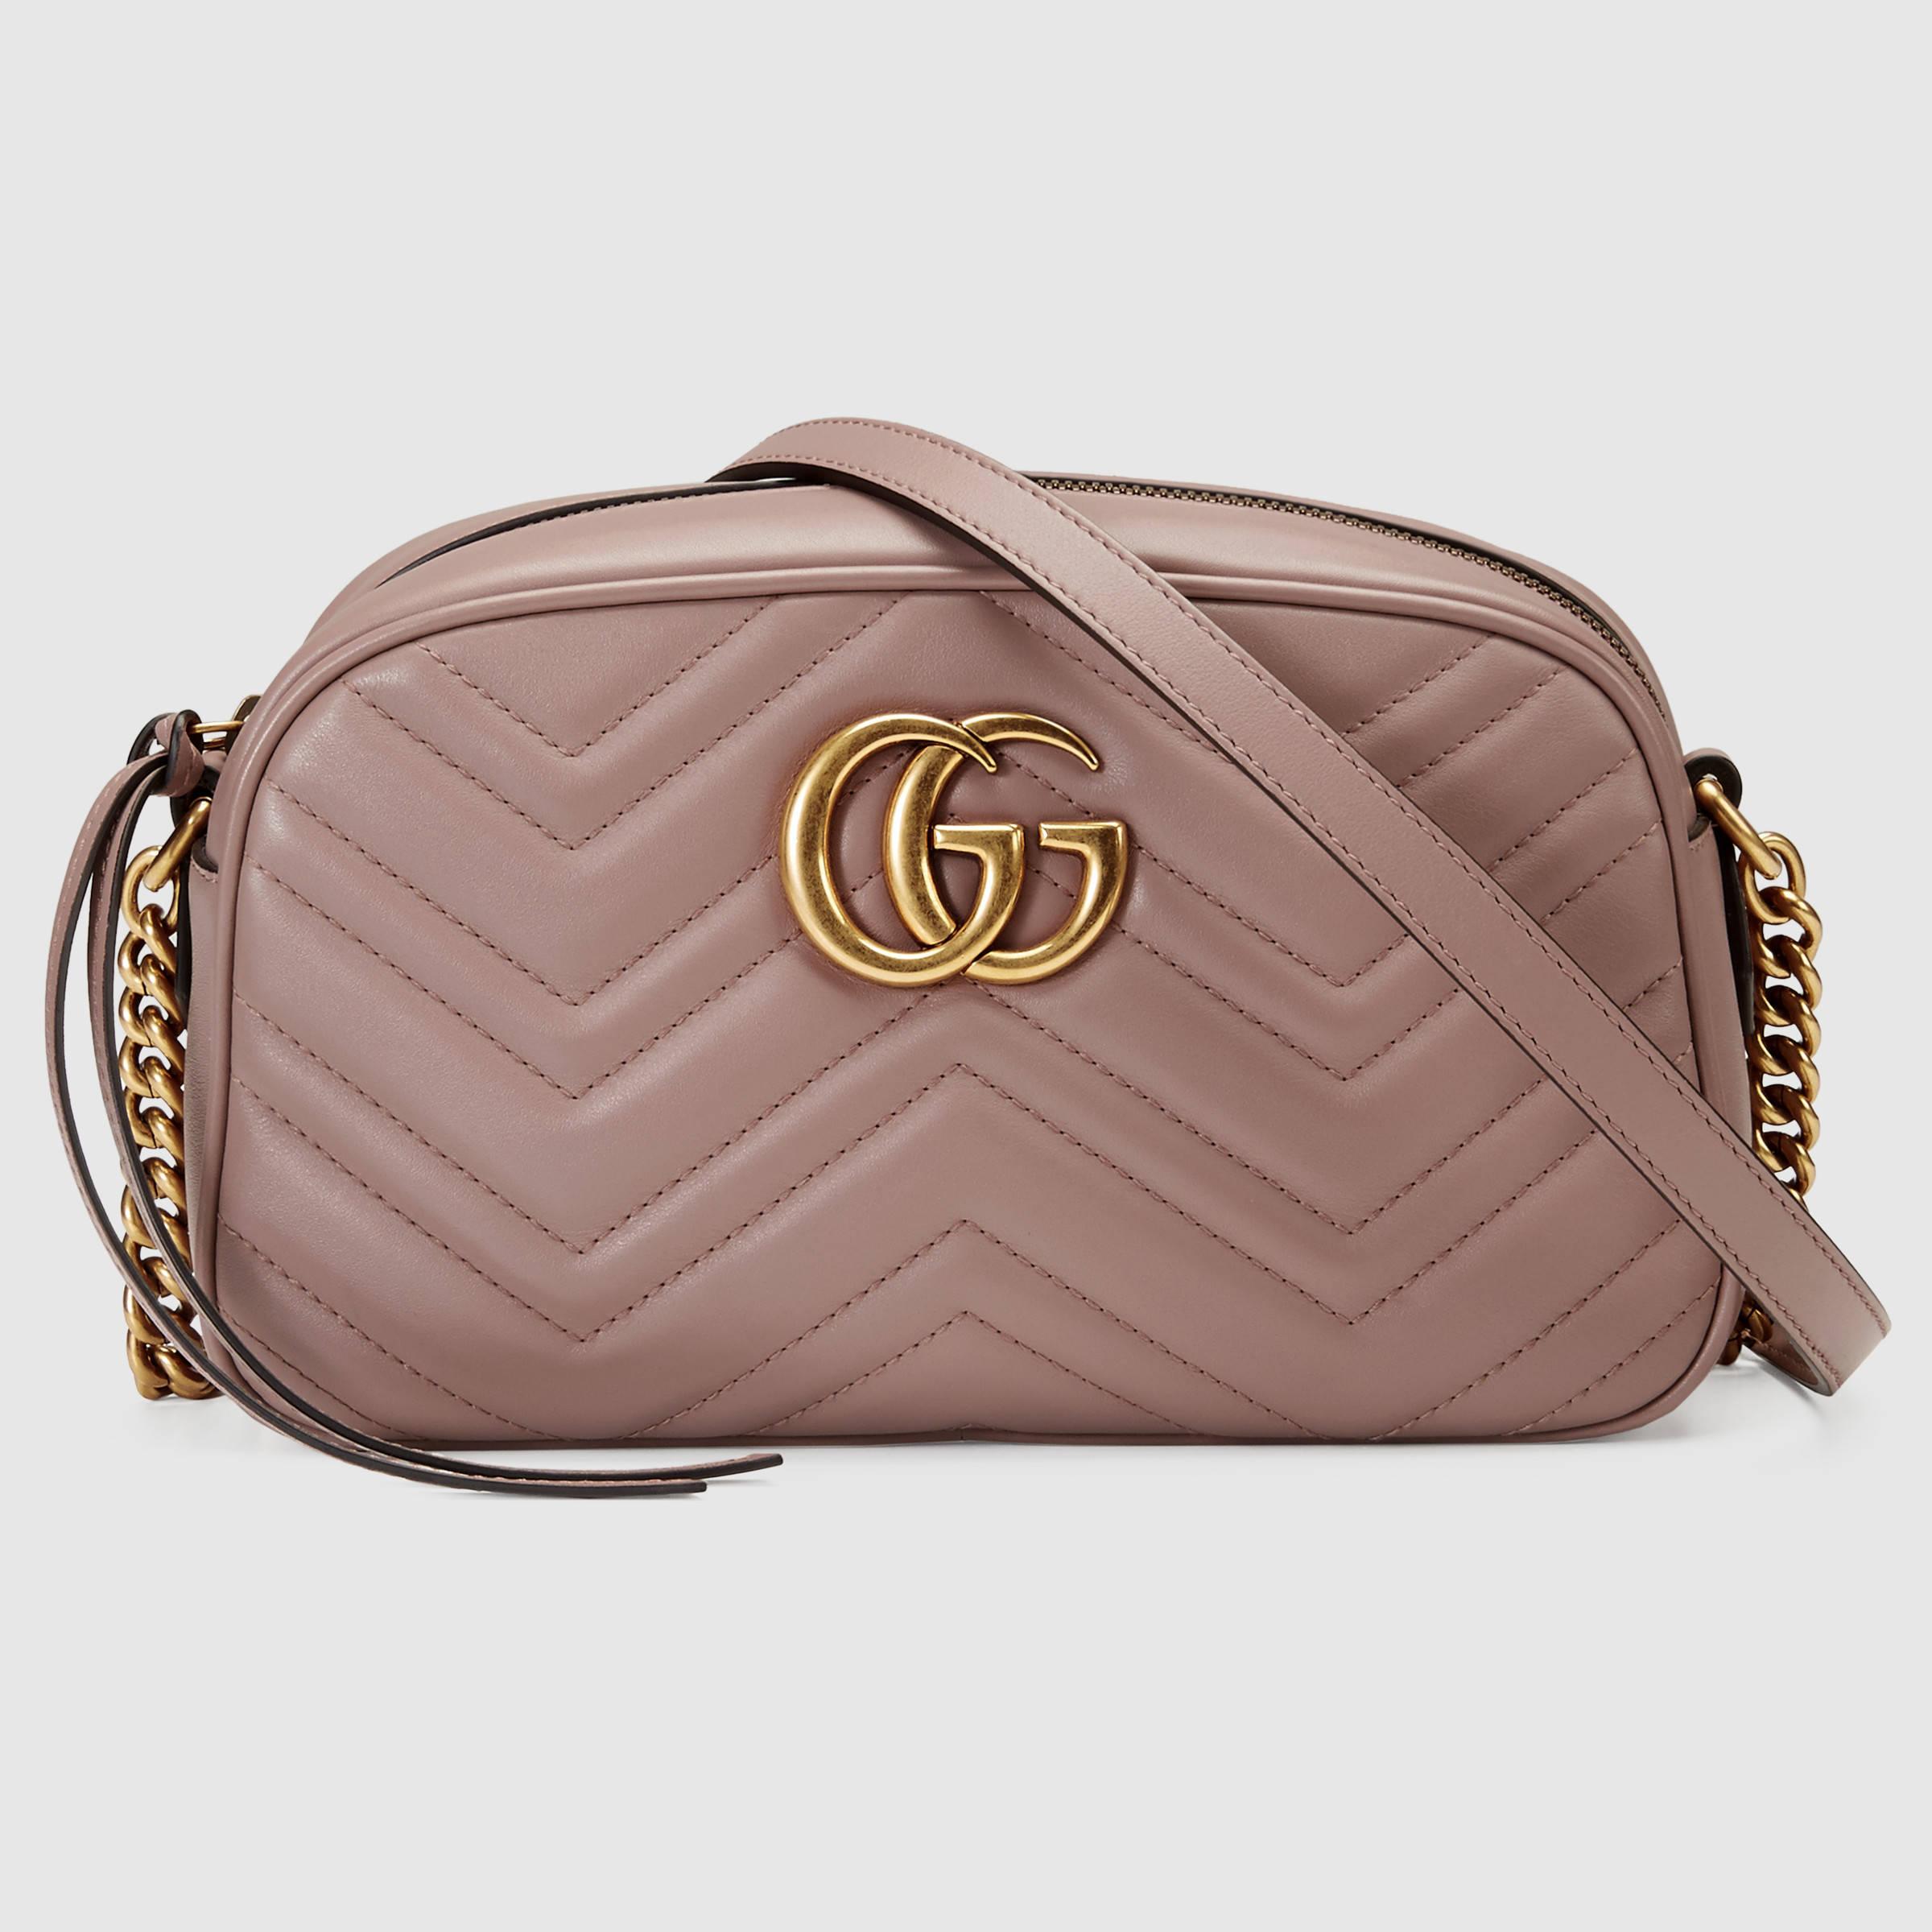 Gucci GG Marmont Matelassé Leather Shoulder Bag in Pink - Lyst